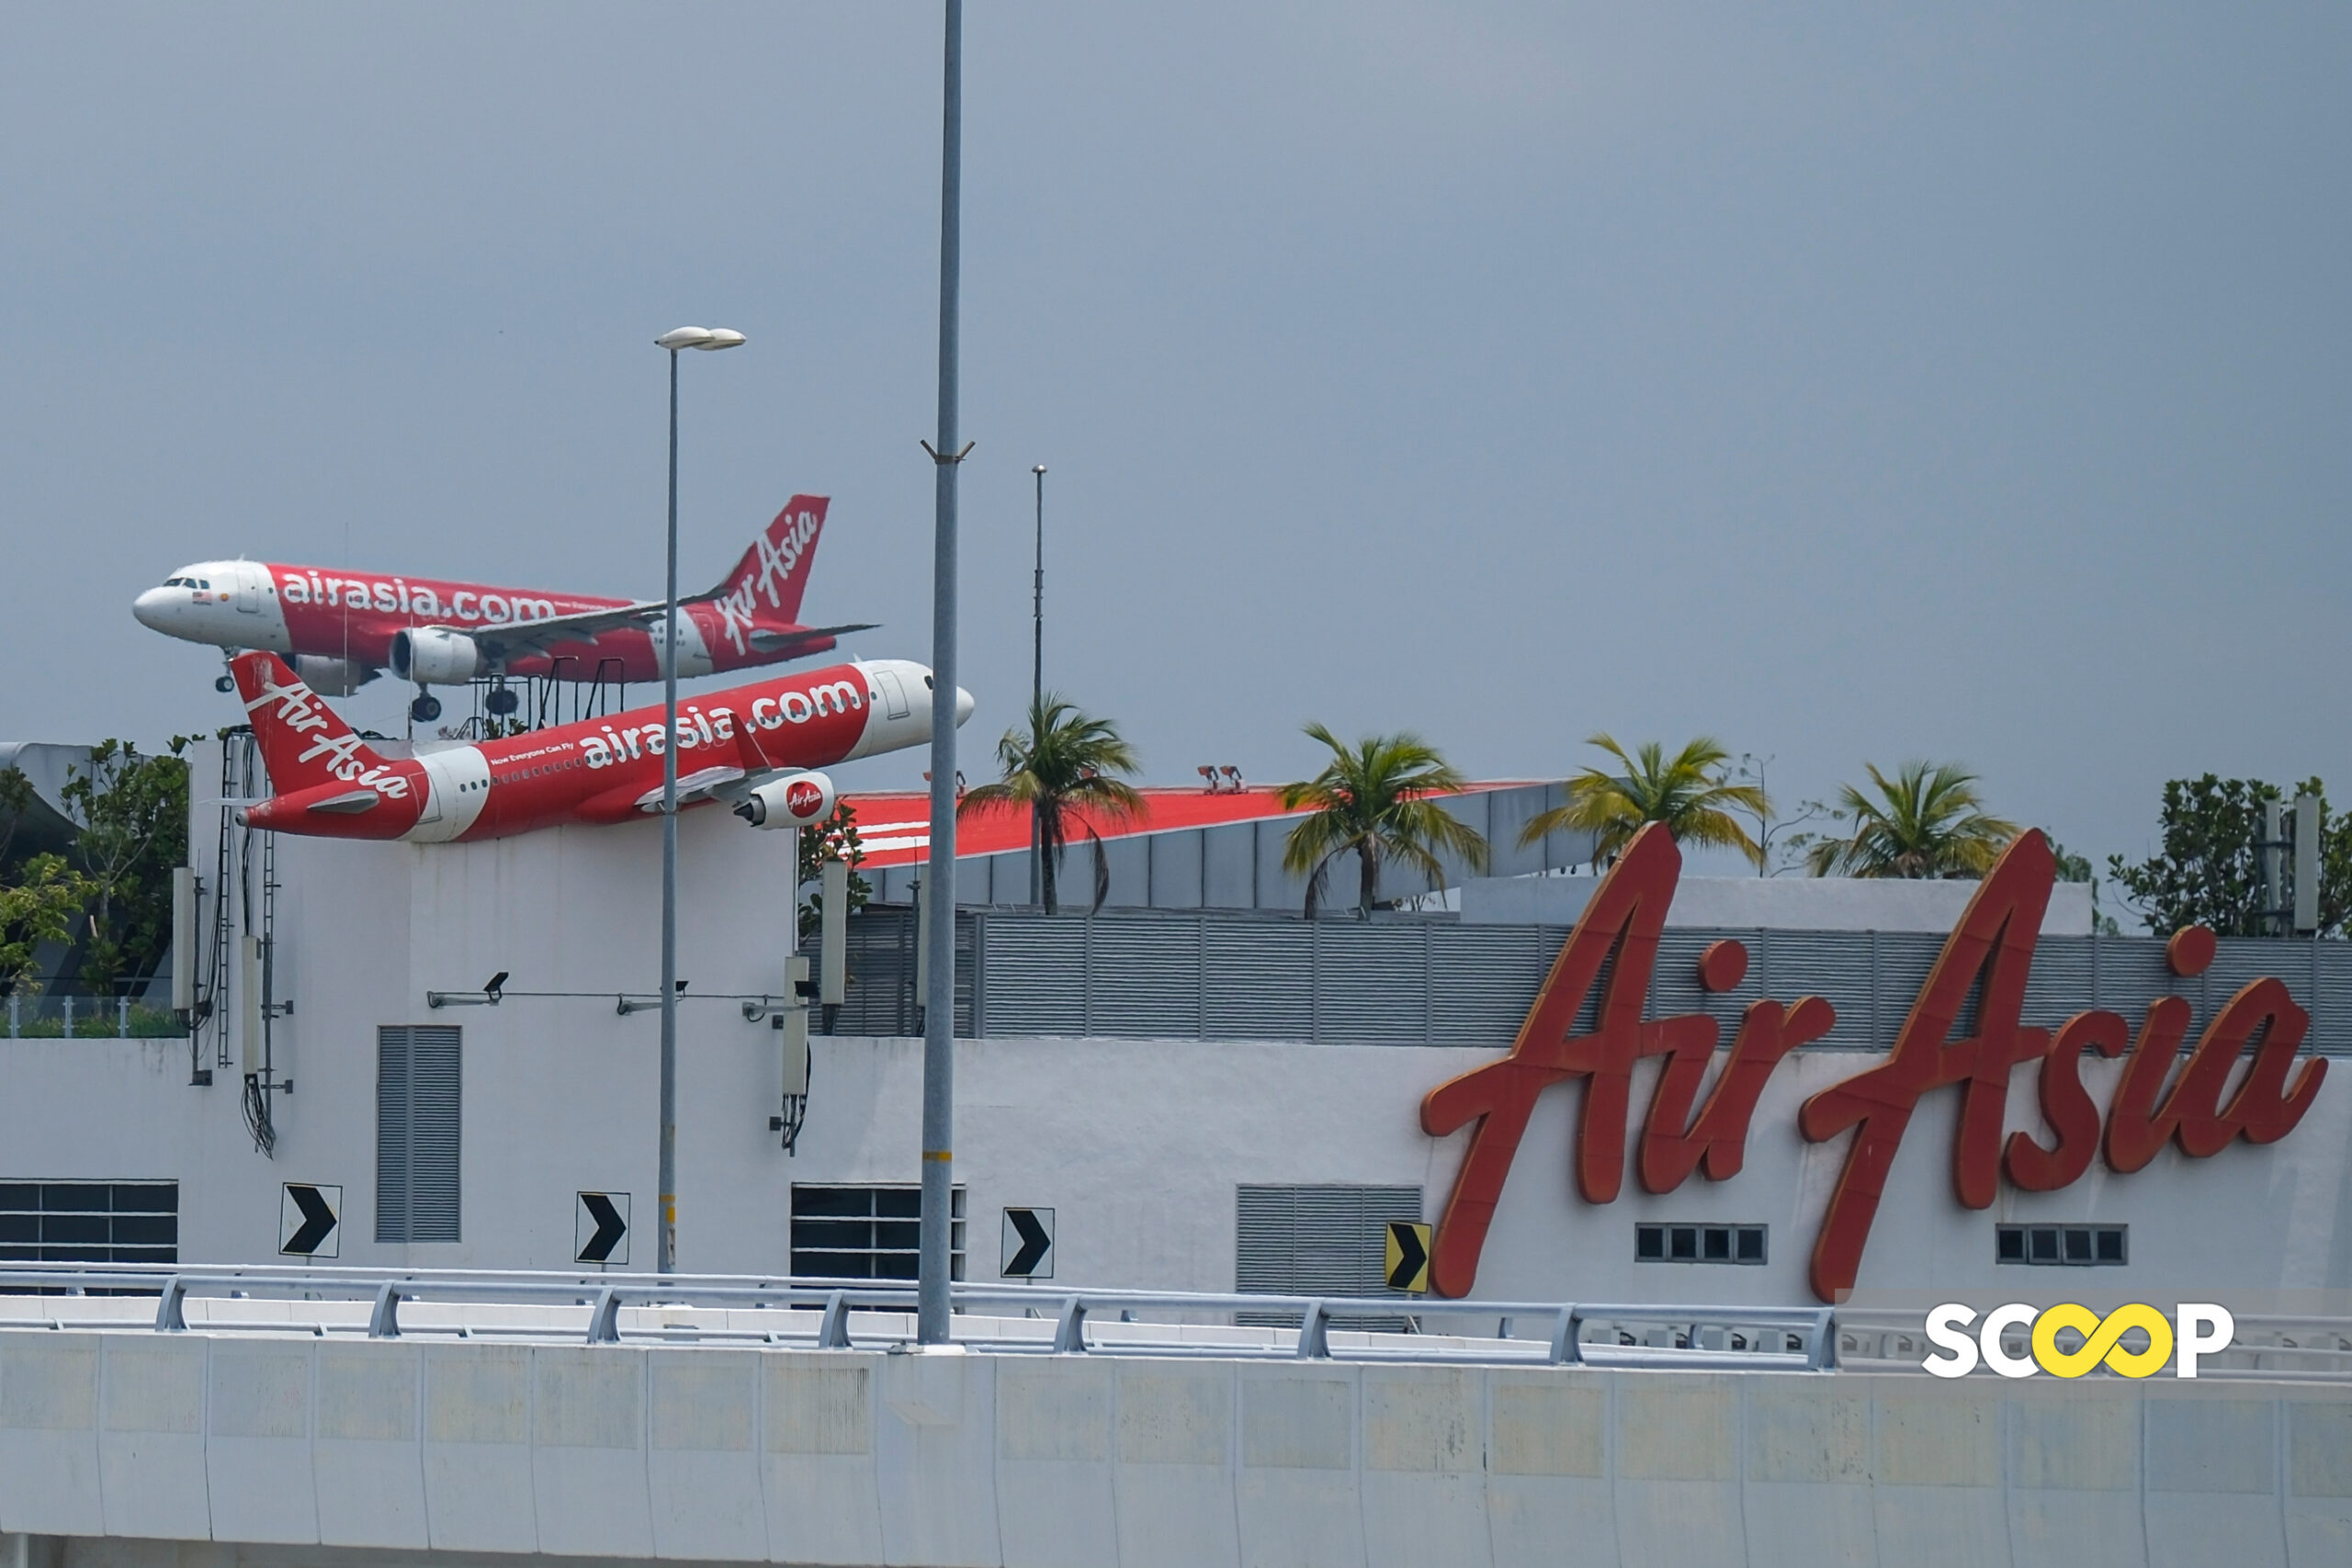 Capital A's aviation segment sees overall improvement, pax volume up 17% y-o-y